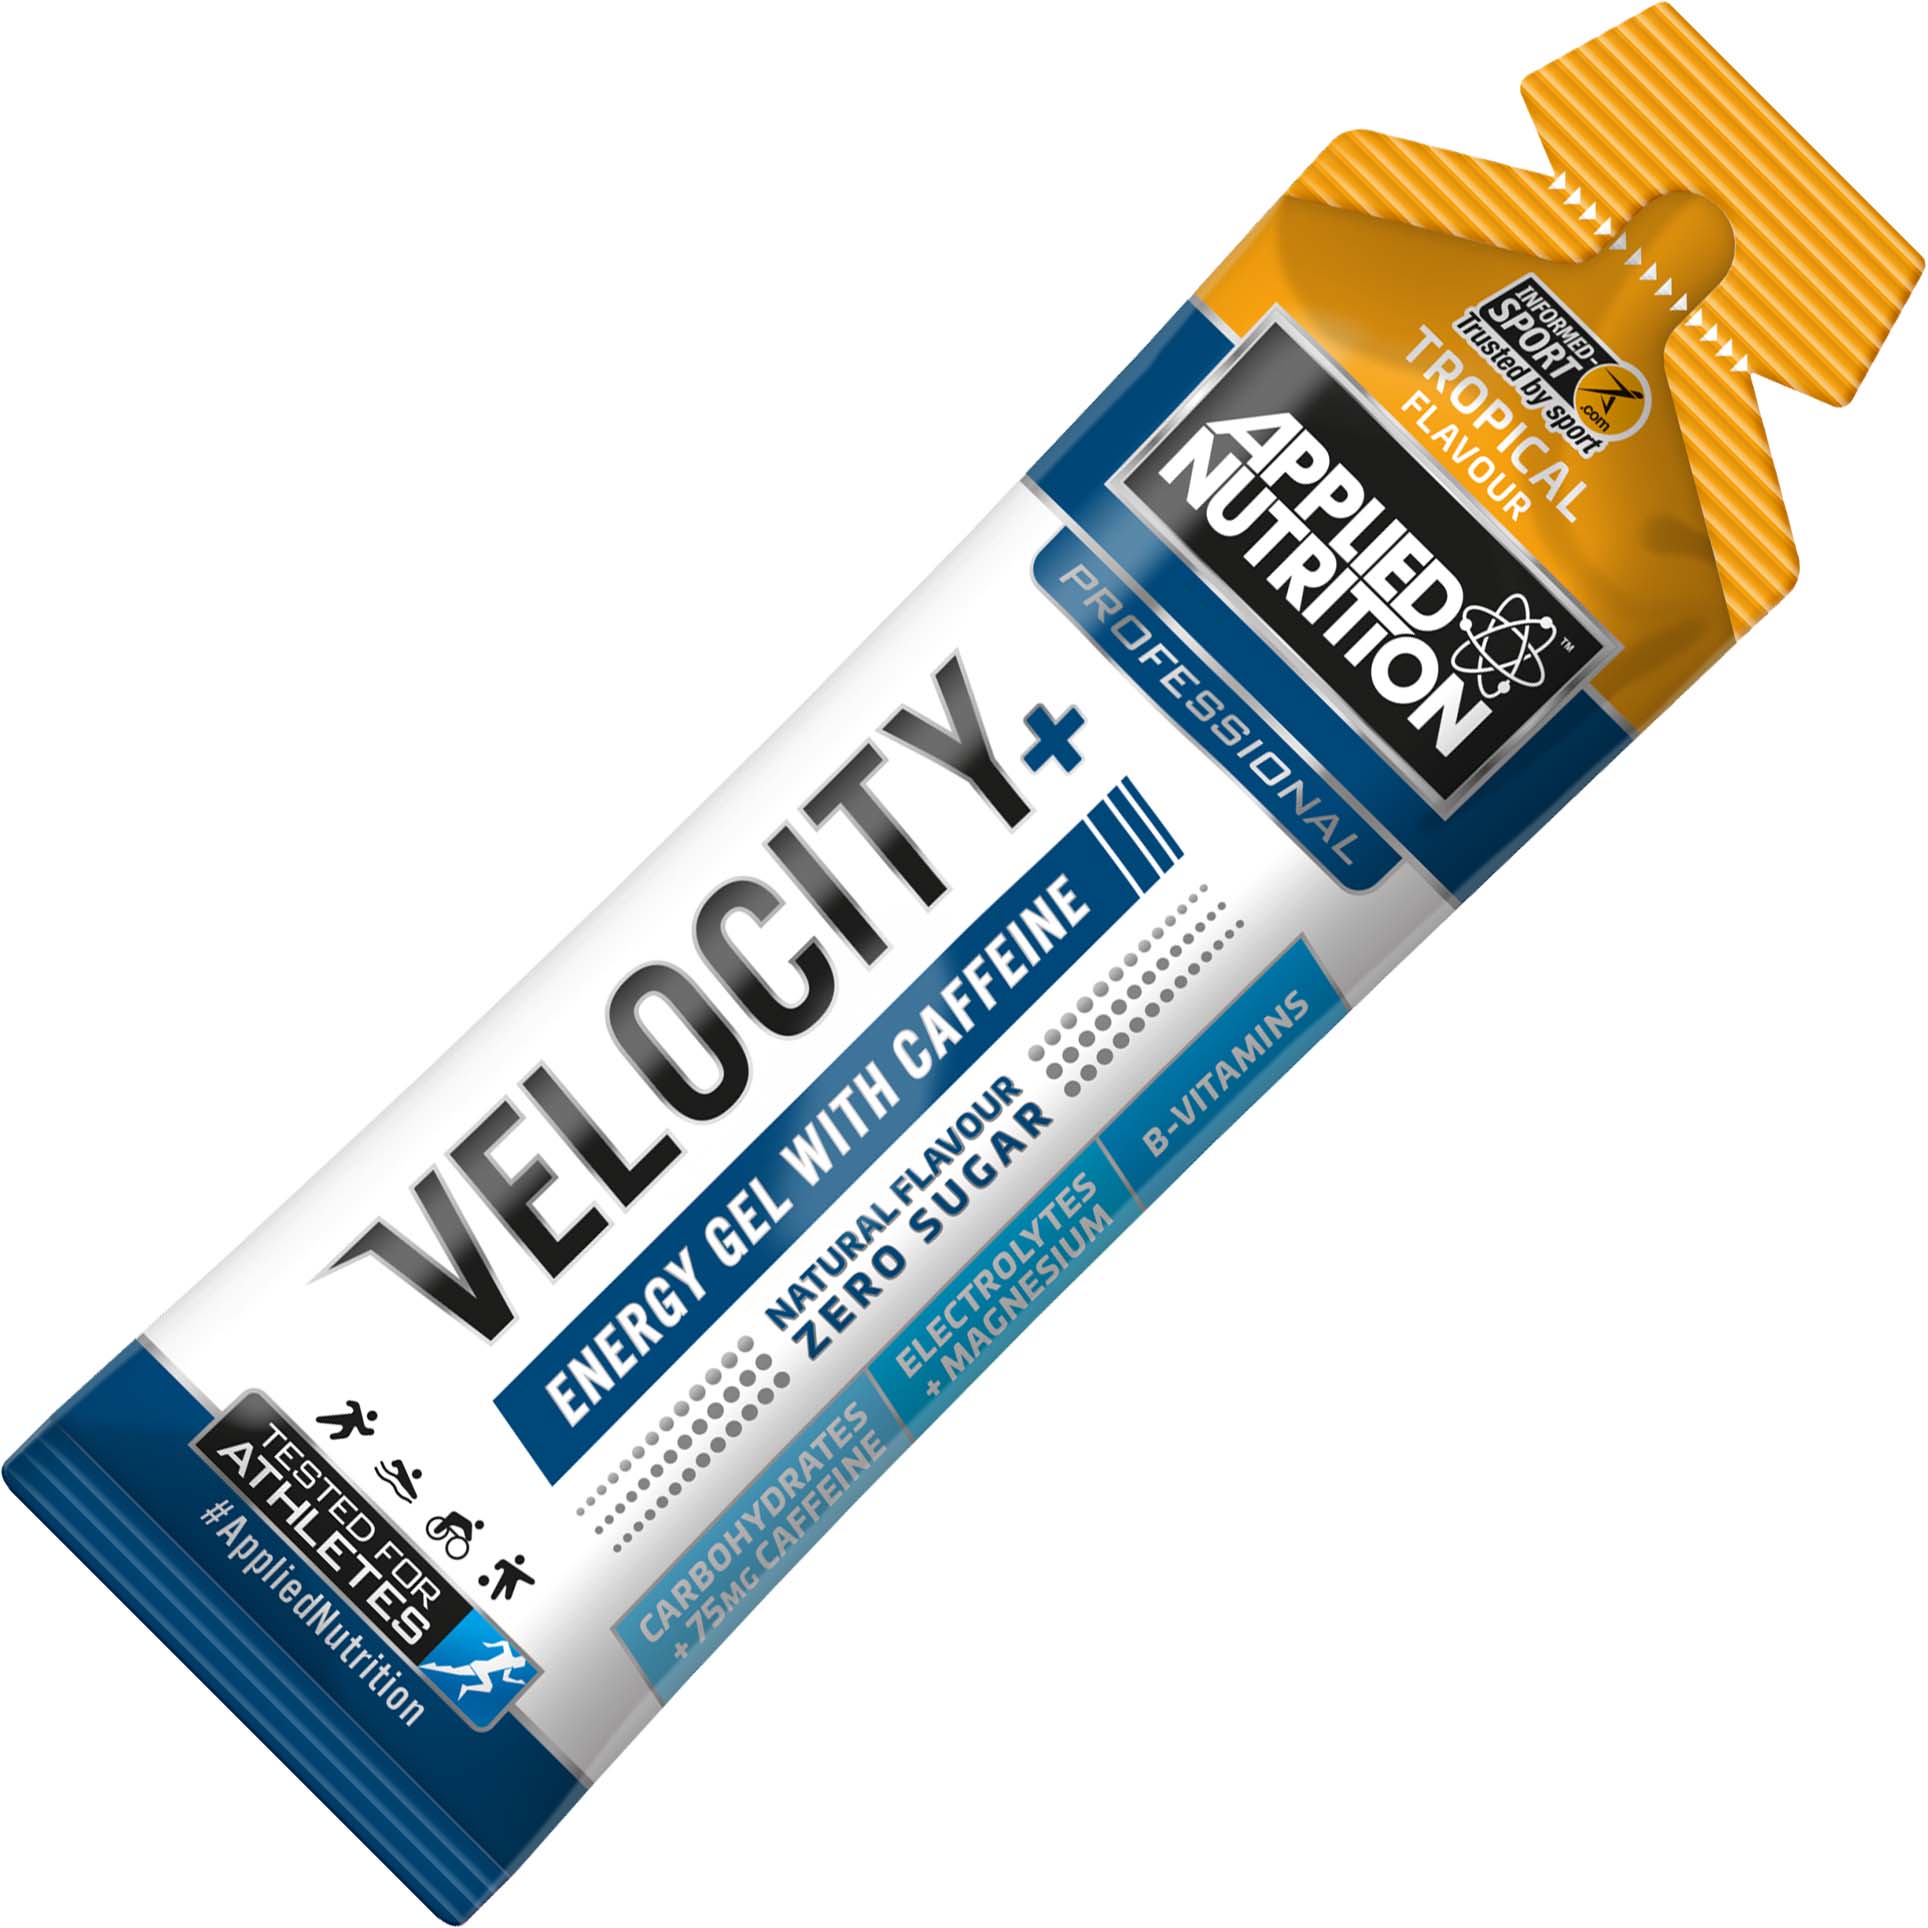 Applied Nutrition Velocity Isotonic Energy Gel with Caffeine, Tropical, 1 Piece